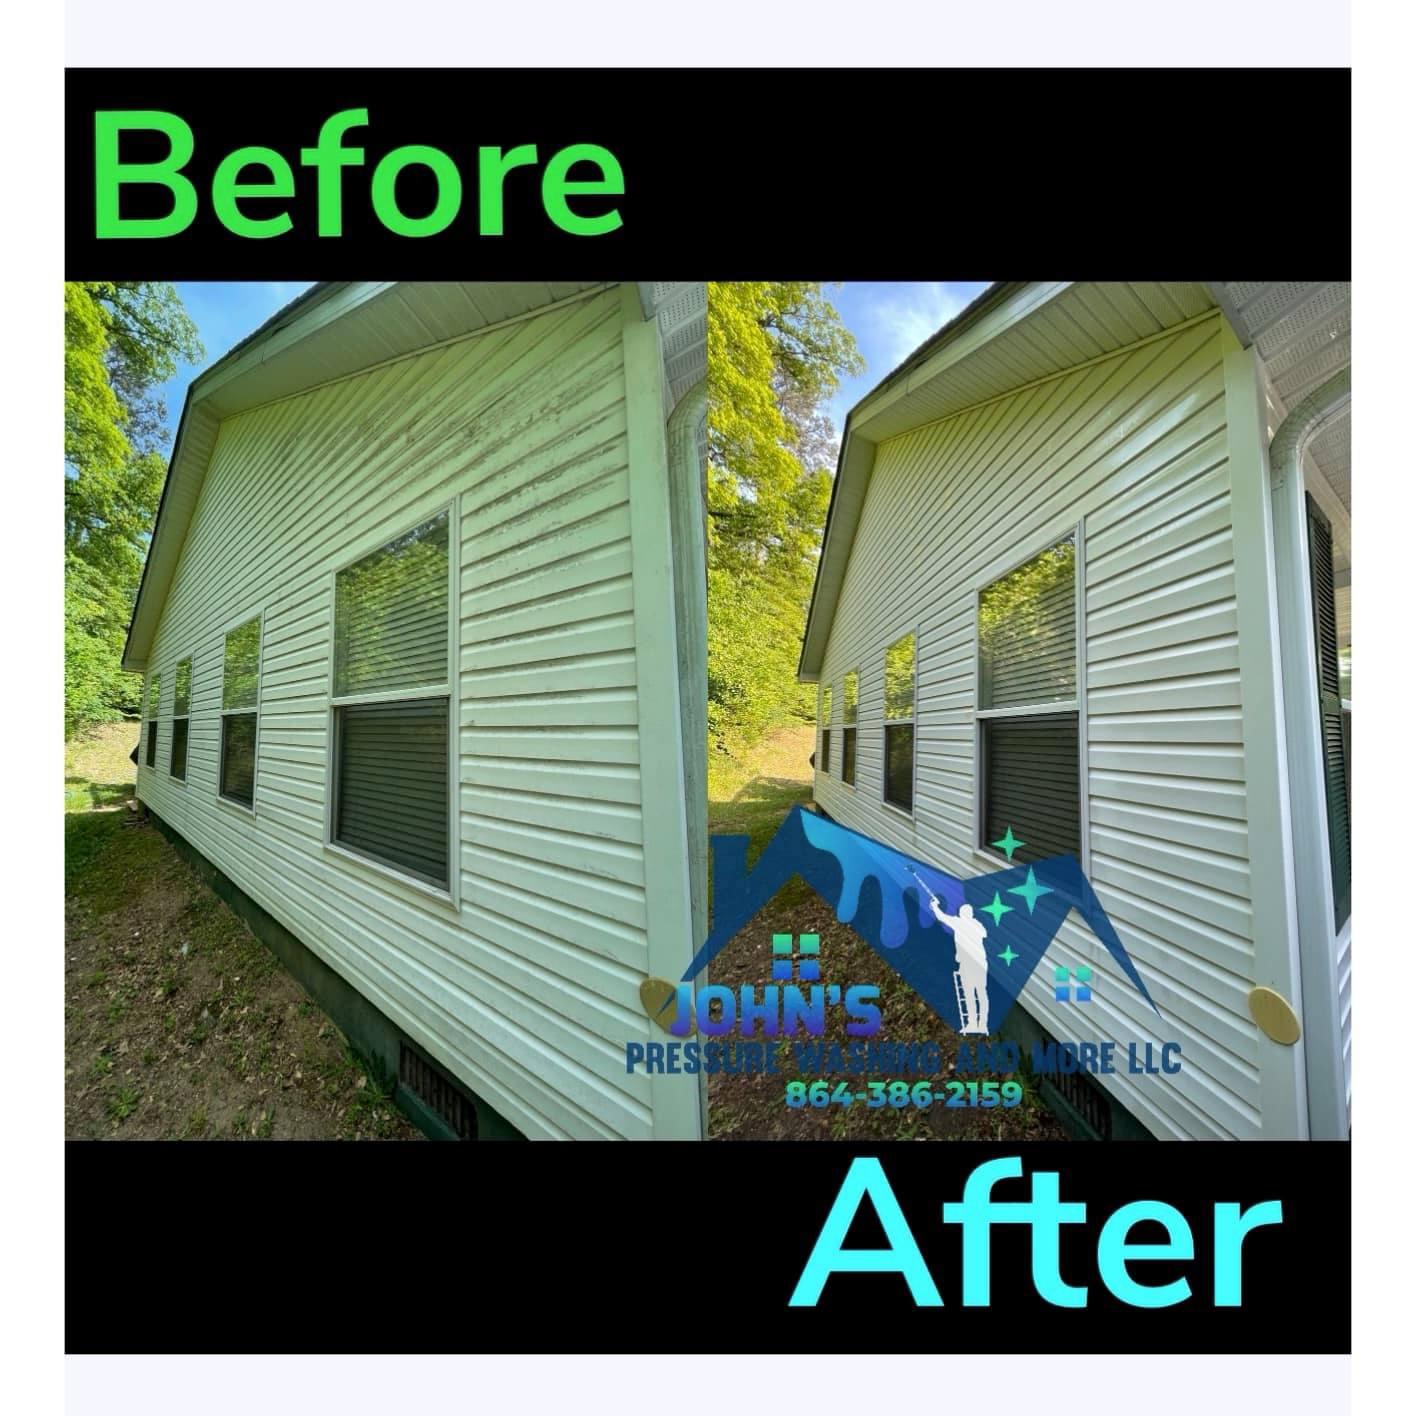 House Wash, Gutter Cleaning, & Driveway cleaning in Easley, SC